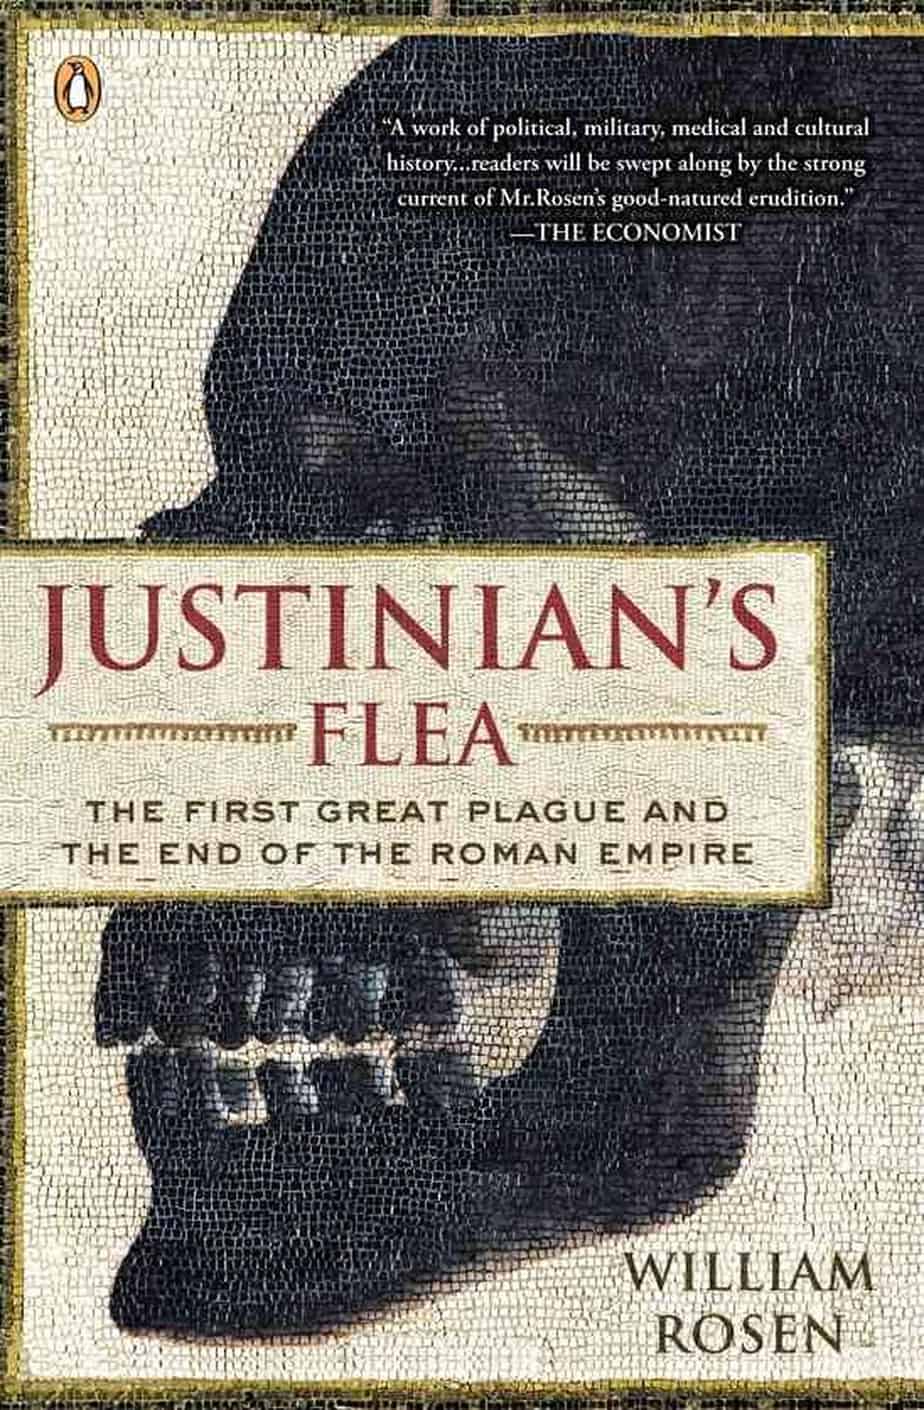 Justinian's Flea The First Great Plague and the End of the Roman Empire by William Rosen